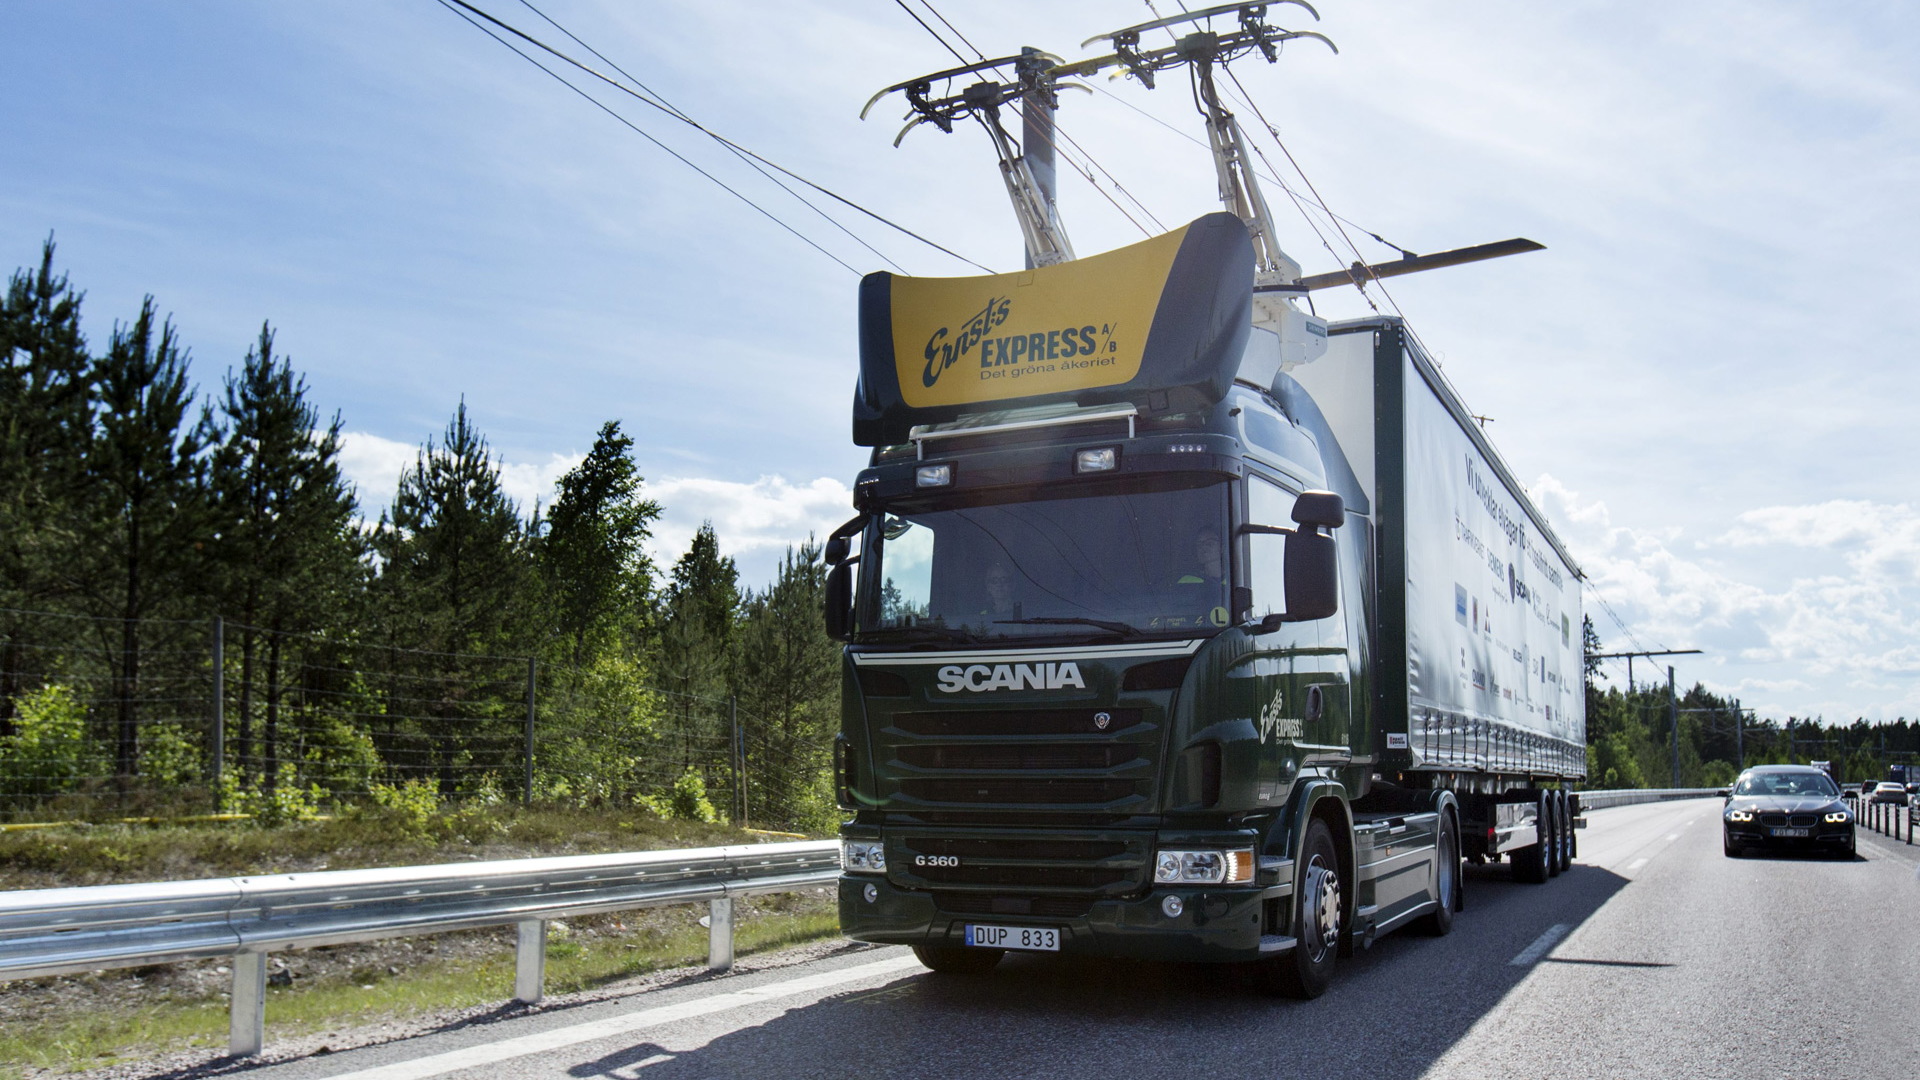 Scania hybrid truck concept designed for "electric highway"